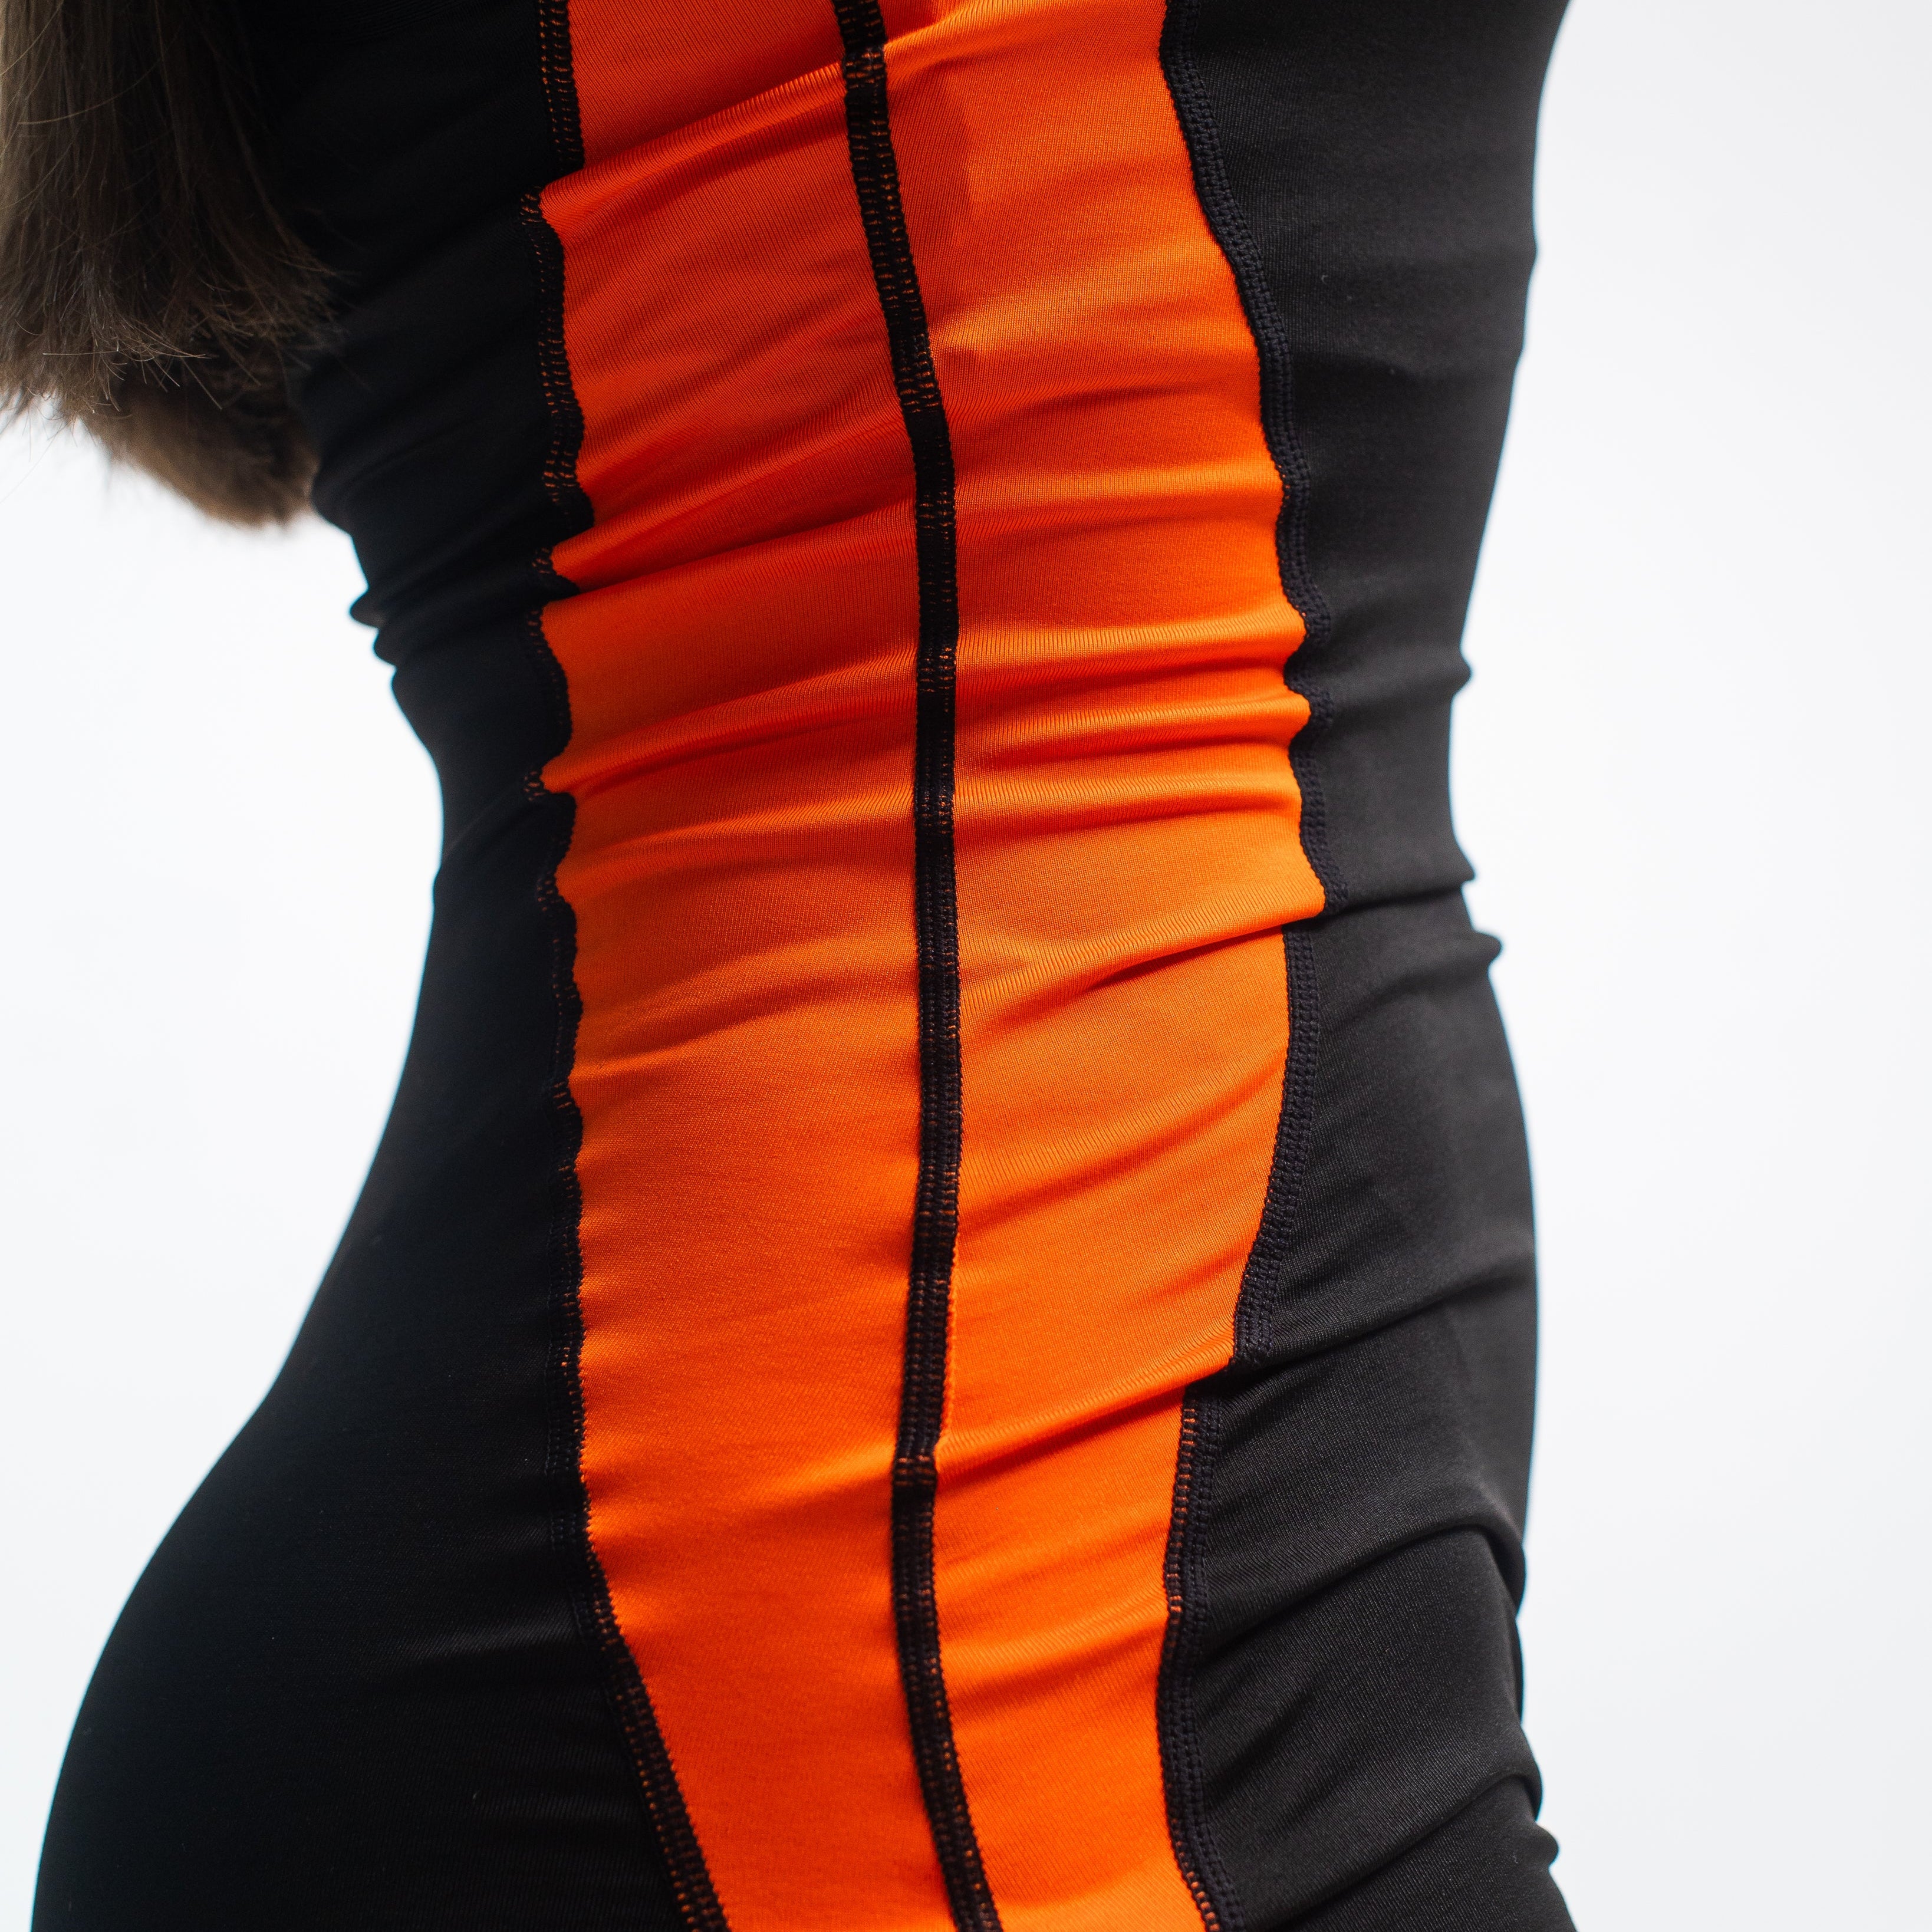 A7 IPF Approved Blaze Luno singlet features extra lat mobility, side panel stitching to guide the squat depth level and curved panel design for a slimming look. The Women's cut singlet features a tapered waist and additional quad room. The IPF Approved Kit includes A7 Singlet, A7 Meet Shirt, A7 Zebra Wrist Wraps, A7 Deadlift Socks, Hourglass Knee Sleeves (Stiff Knee Sleeves and Rigor Mortis Knee Sleeves). Genouillères powerlifting shipping to France, Spain, Ireland, Germany, Italy, Sweden and EU. 